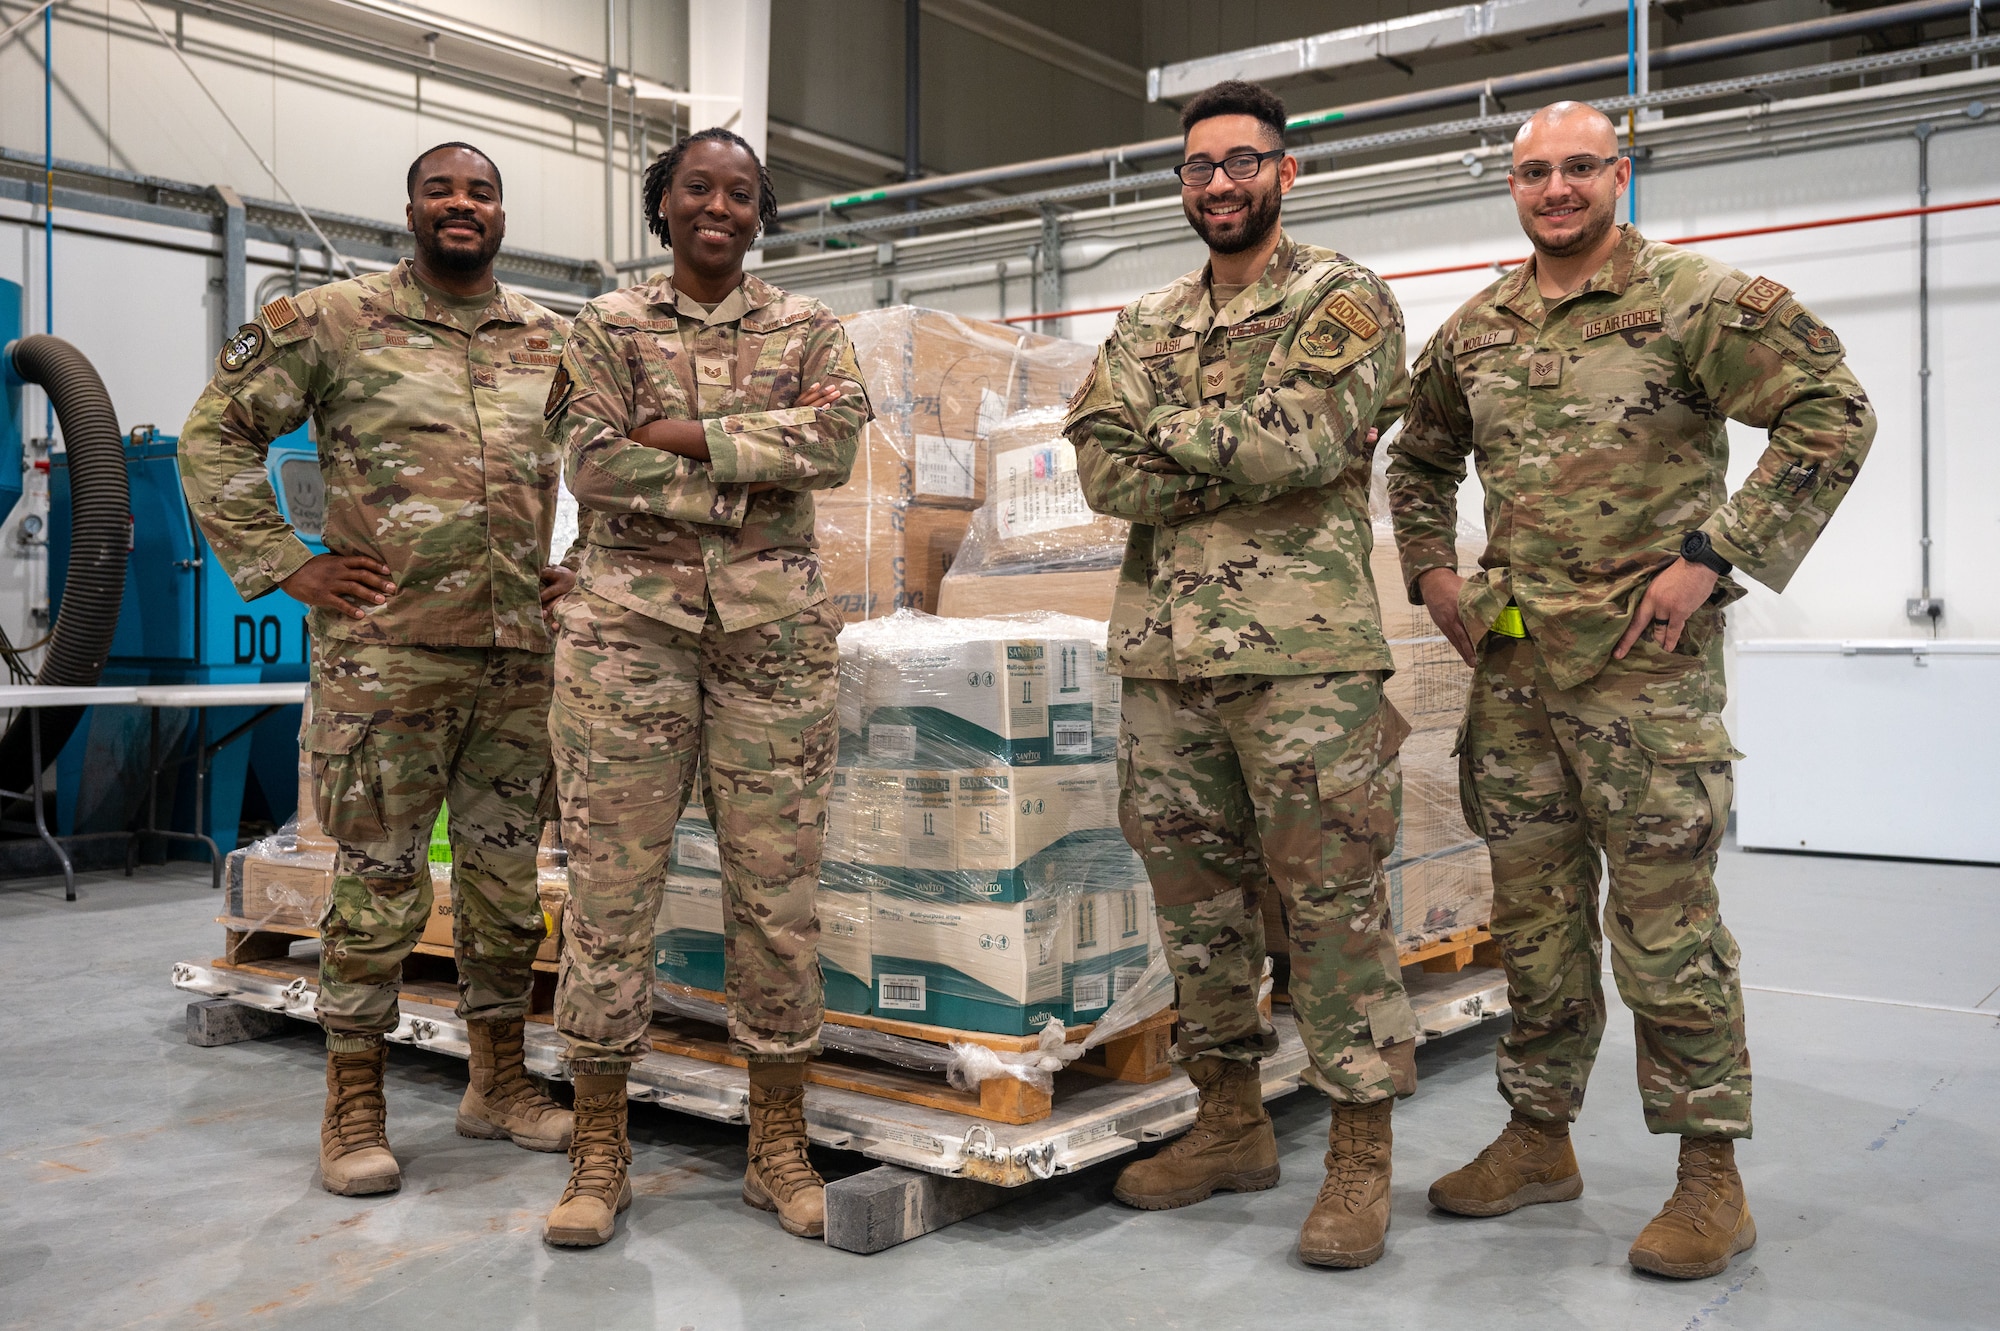 A photo of Airmen standing in front of humanitarian aid supplies